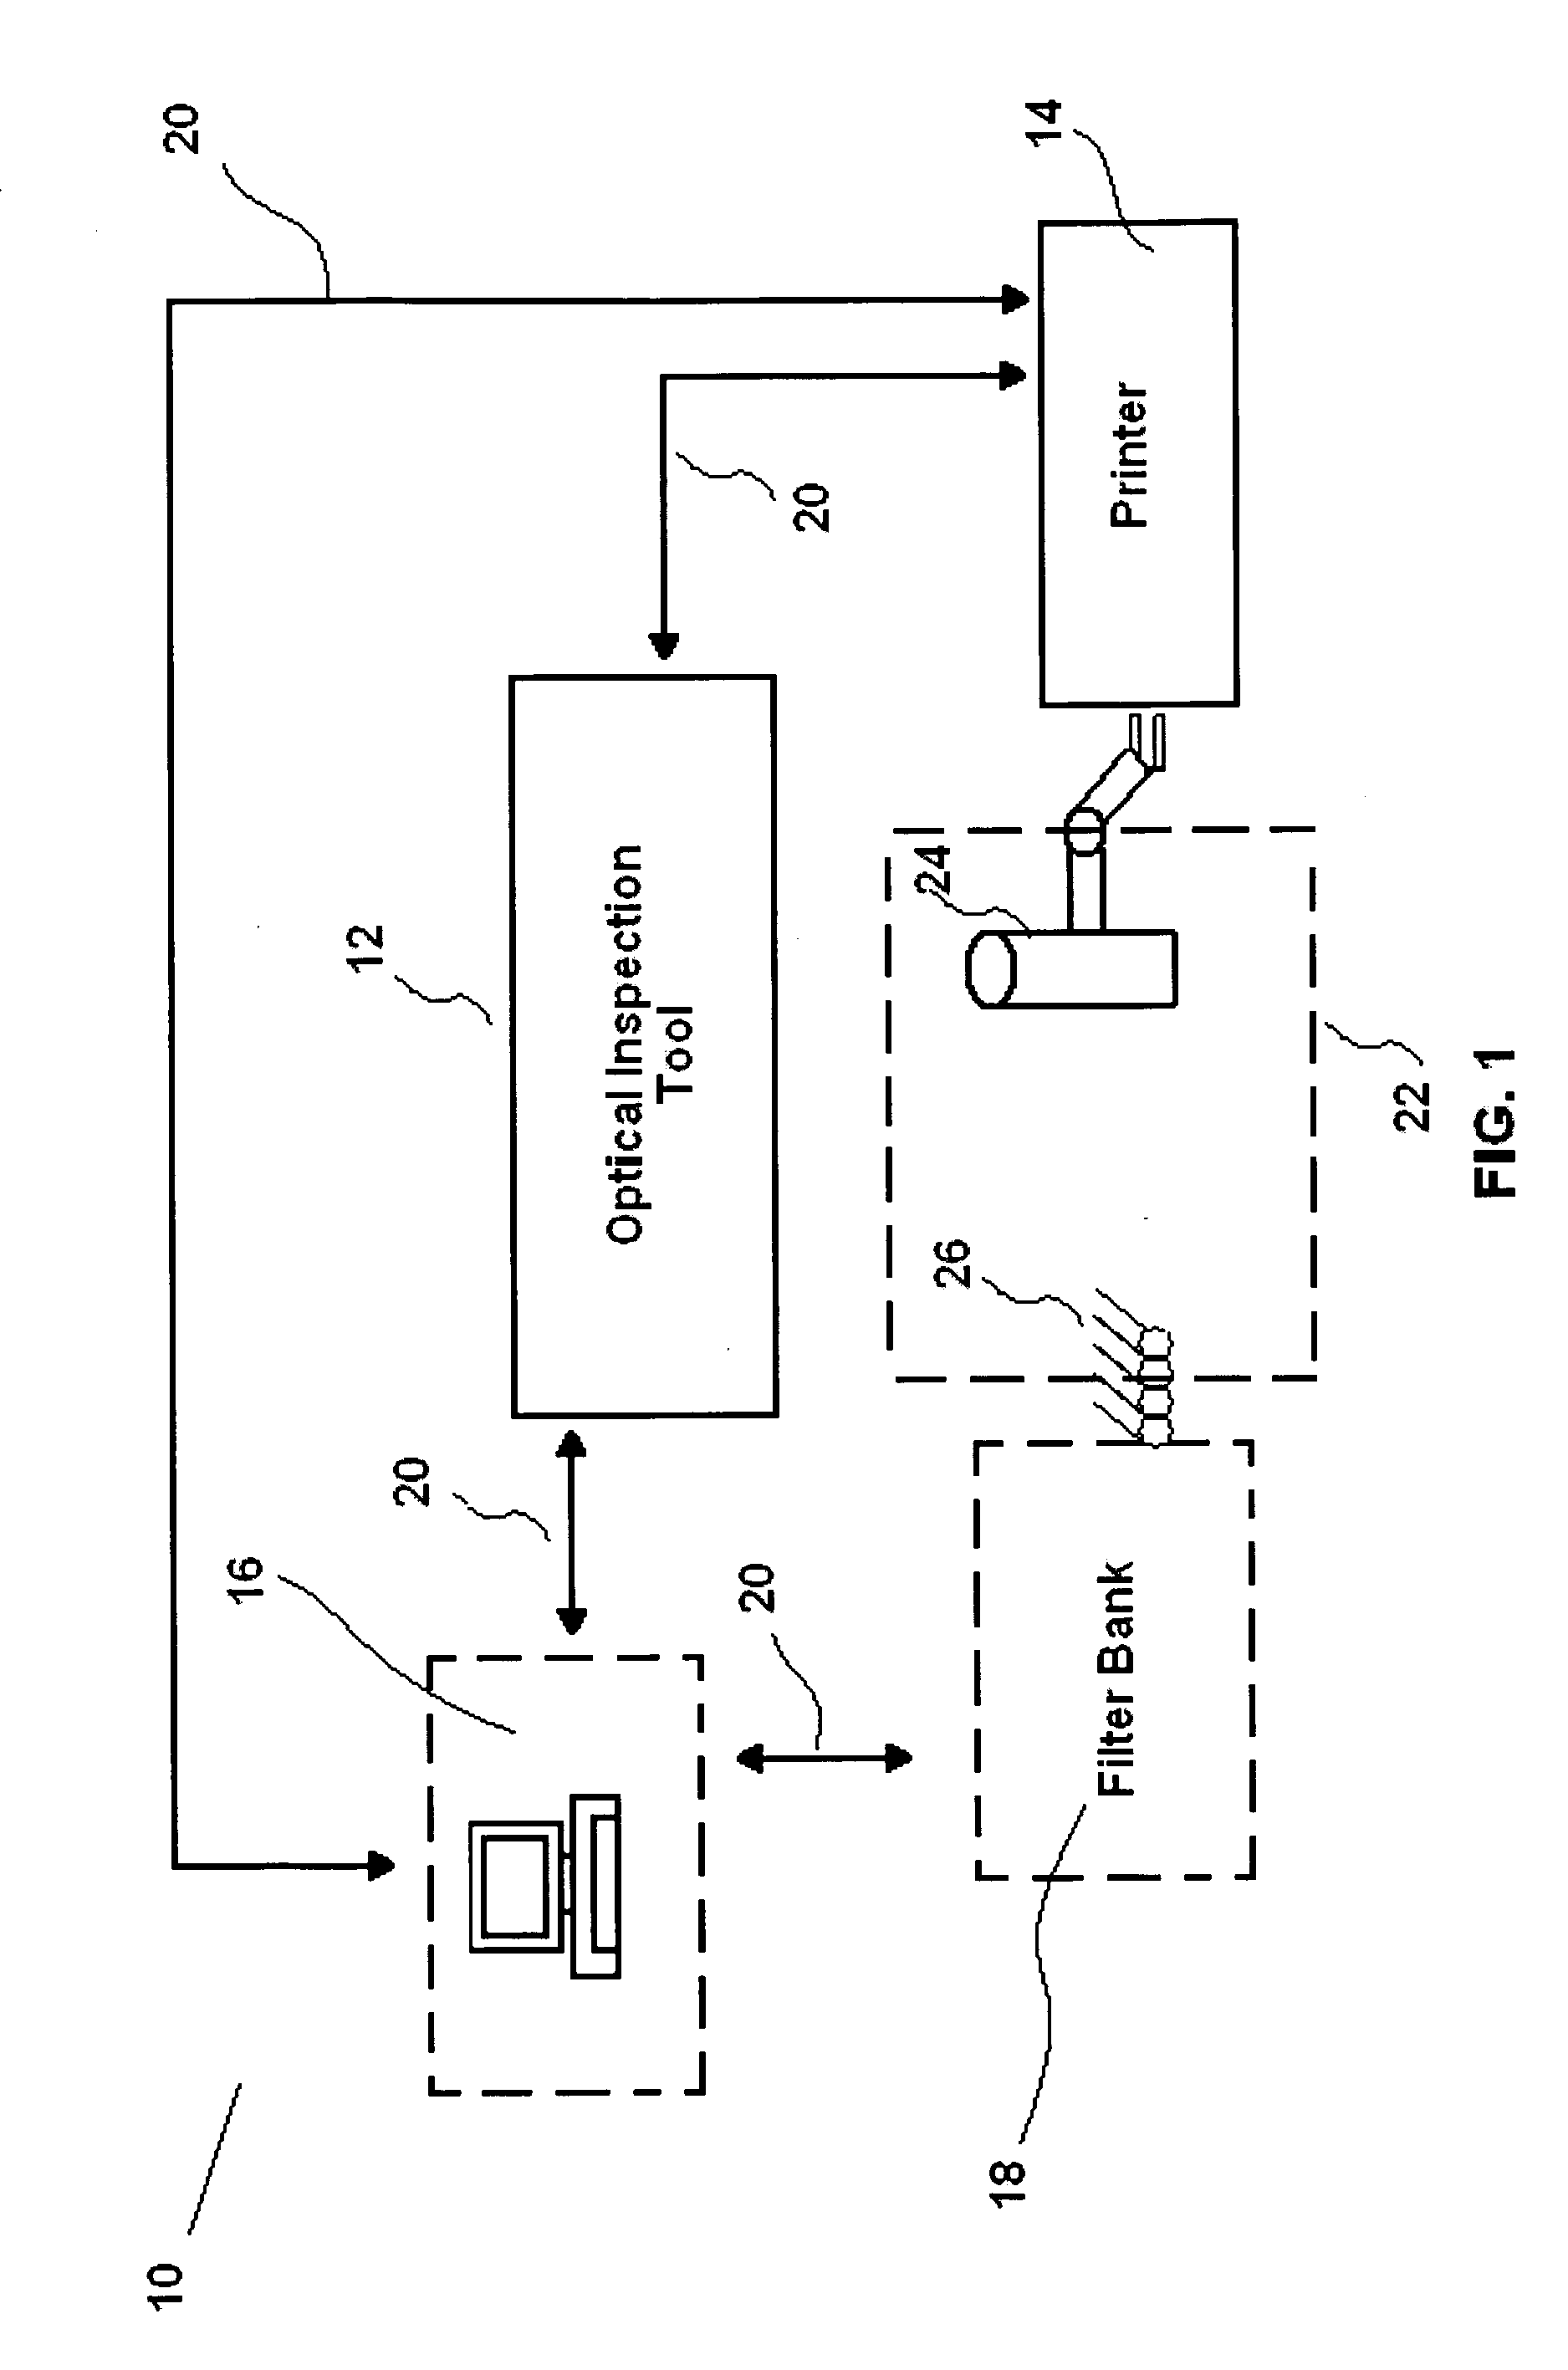 Printed fourier filtering in optical inspection tools